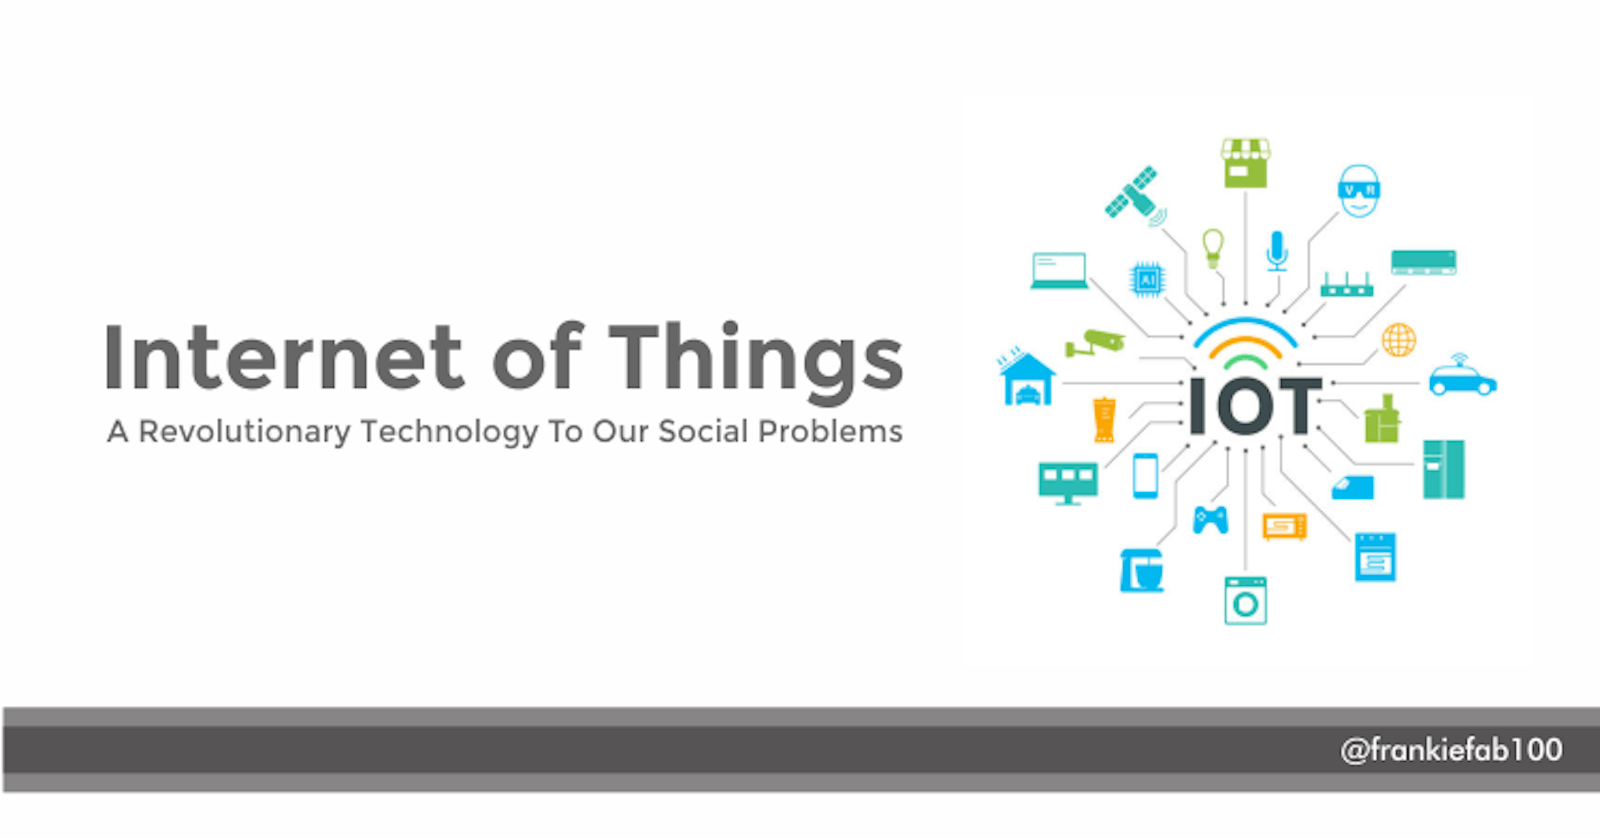 Internet of Things (IoT): A Revolutionary Technology To Our Social Problems